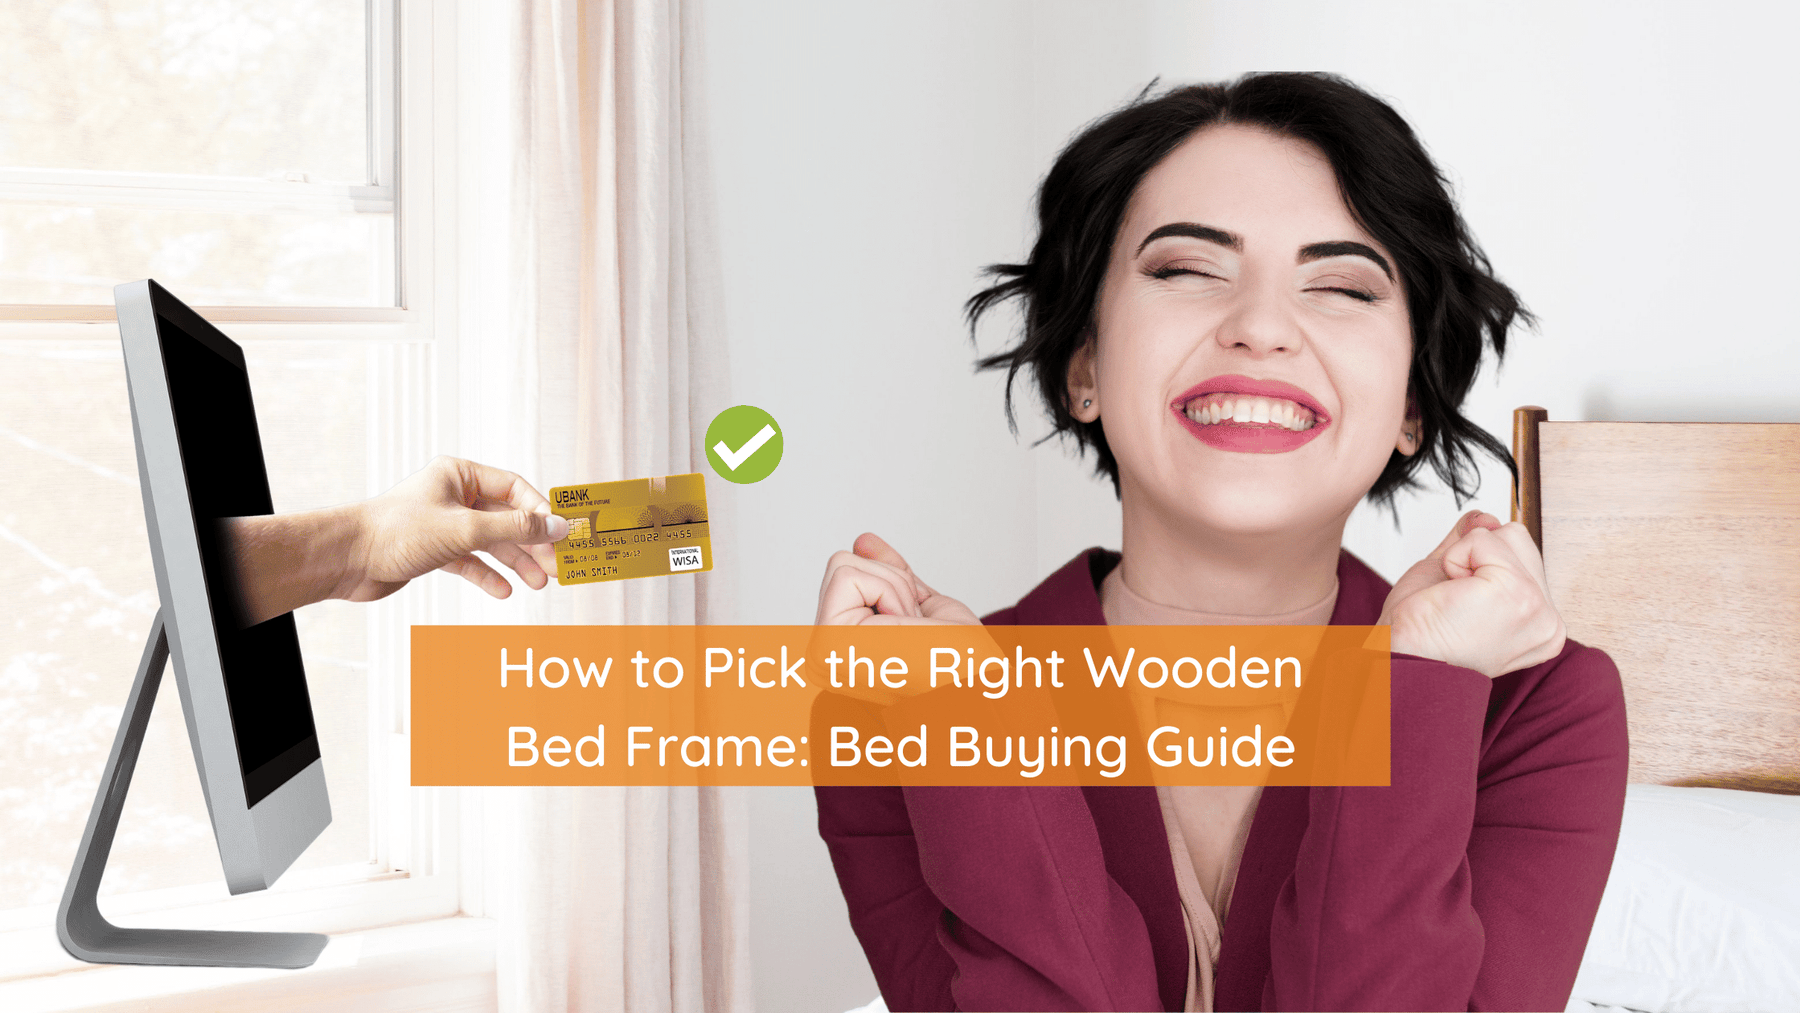 How to Pick the Right Wooden Bed Frame: Bed Buying Guide